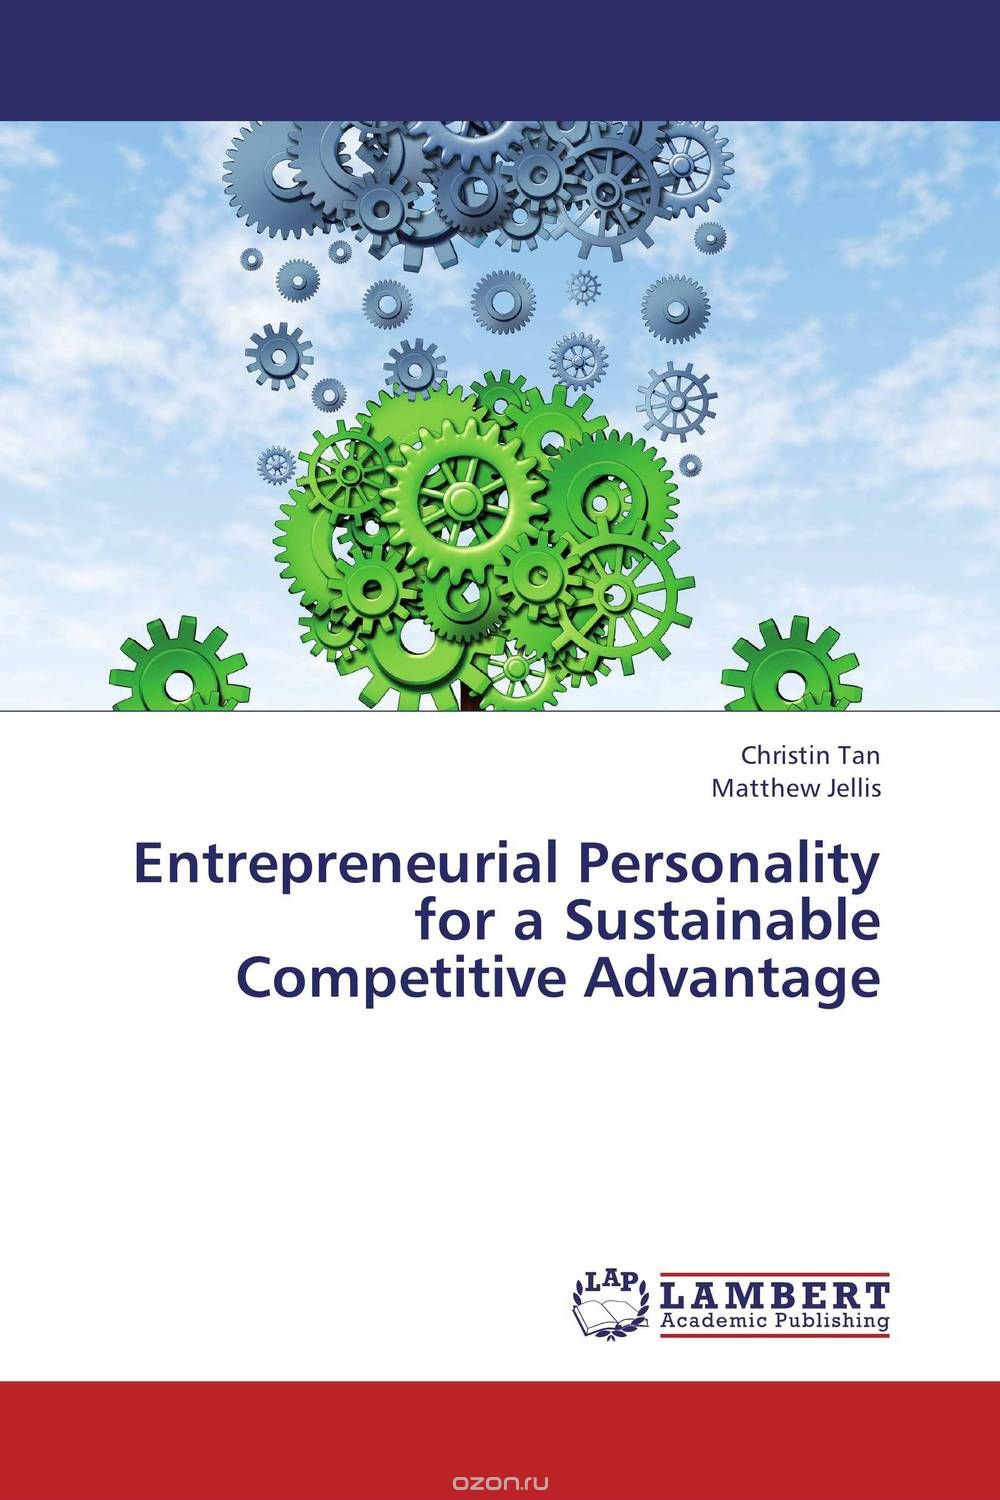 Скачать книгу "Entrepreneurial Personality  for a Sustainable Competitive Advantage"